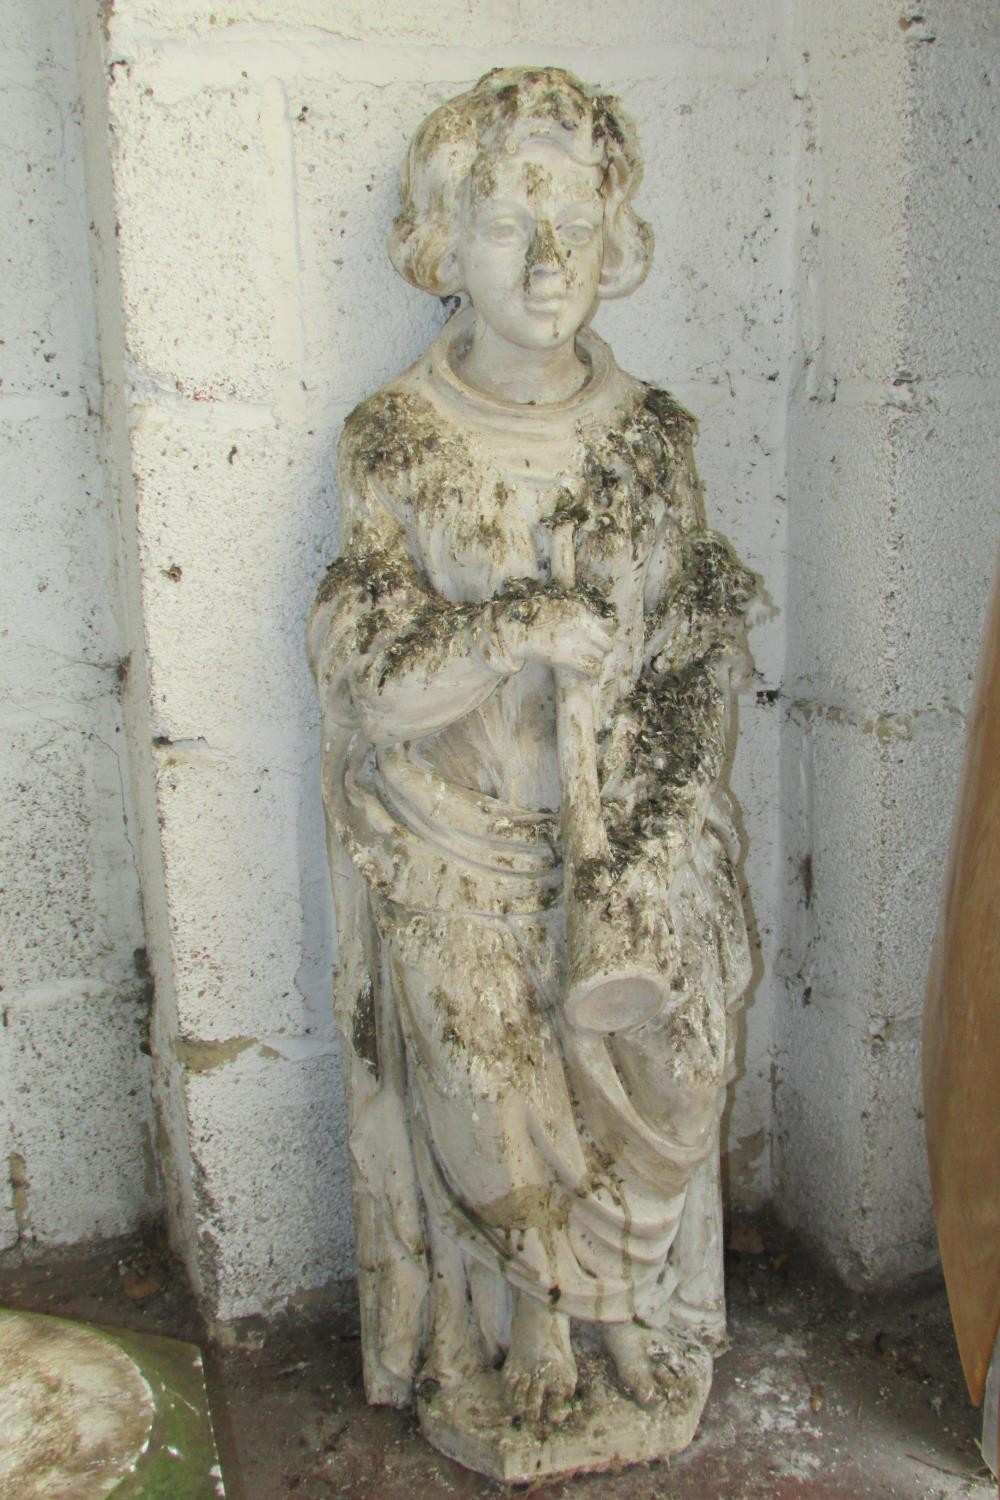 A decorative composition (to simulate white marble) figure in the form of a medieval court